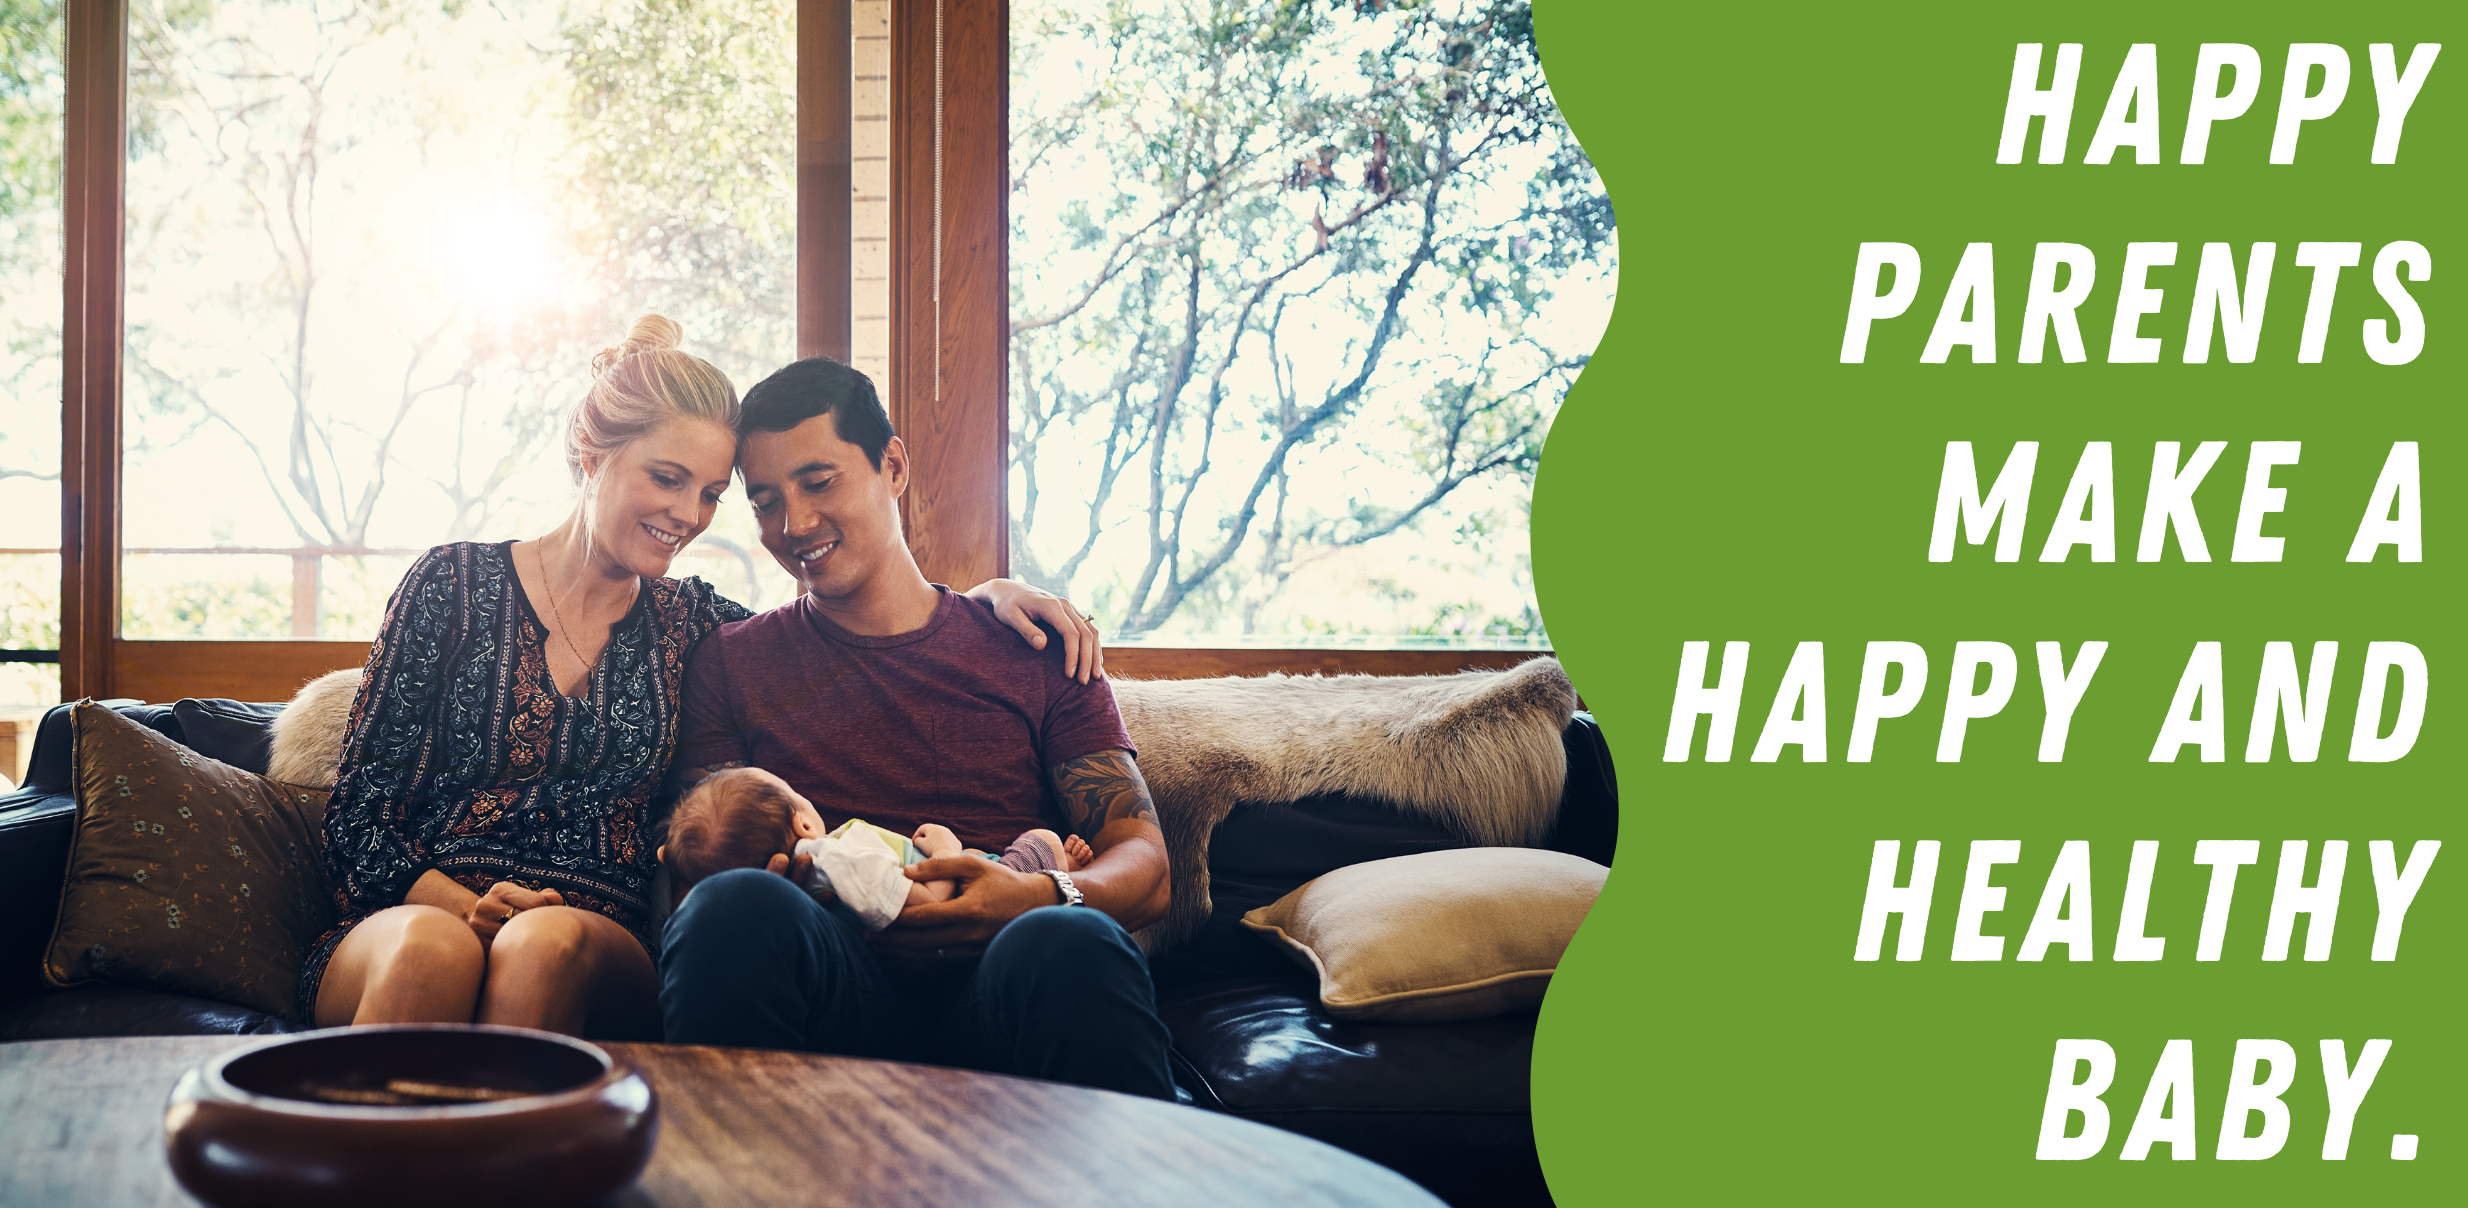 A graphic that reads "Happy Parents Make a Happy and Healthy Baby" to the right of a stock photo of a white couple sitting on a couch holding a baby in their laps. New Parent Counseling in Centennial Colorado